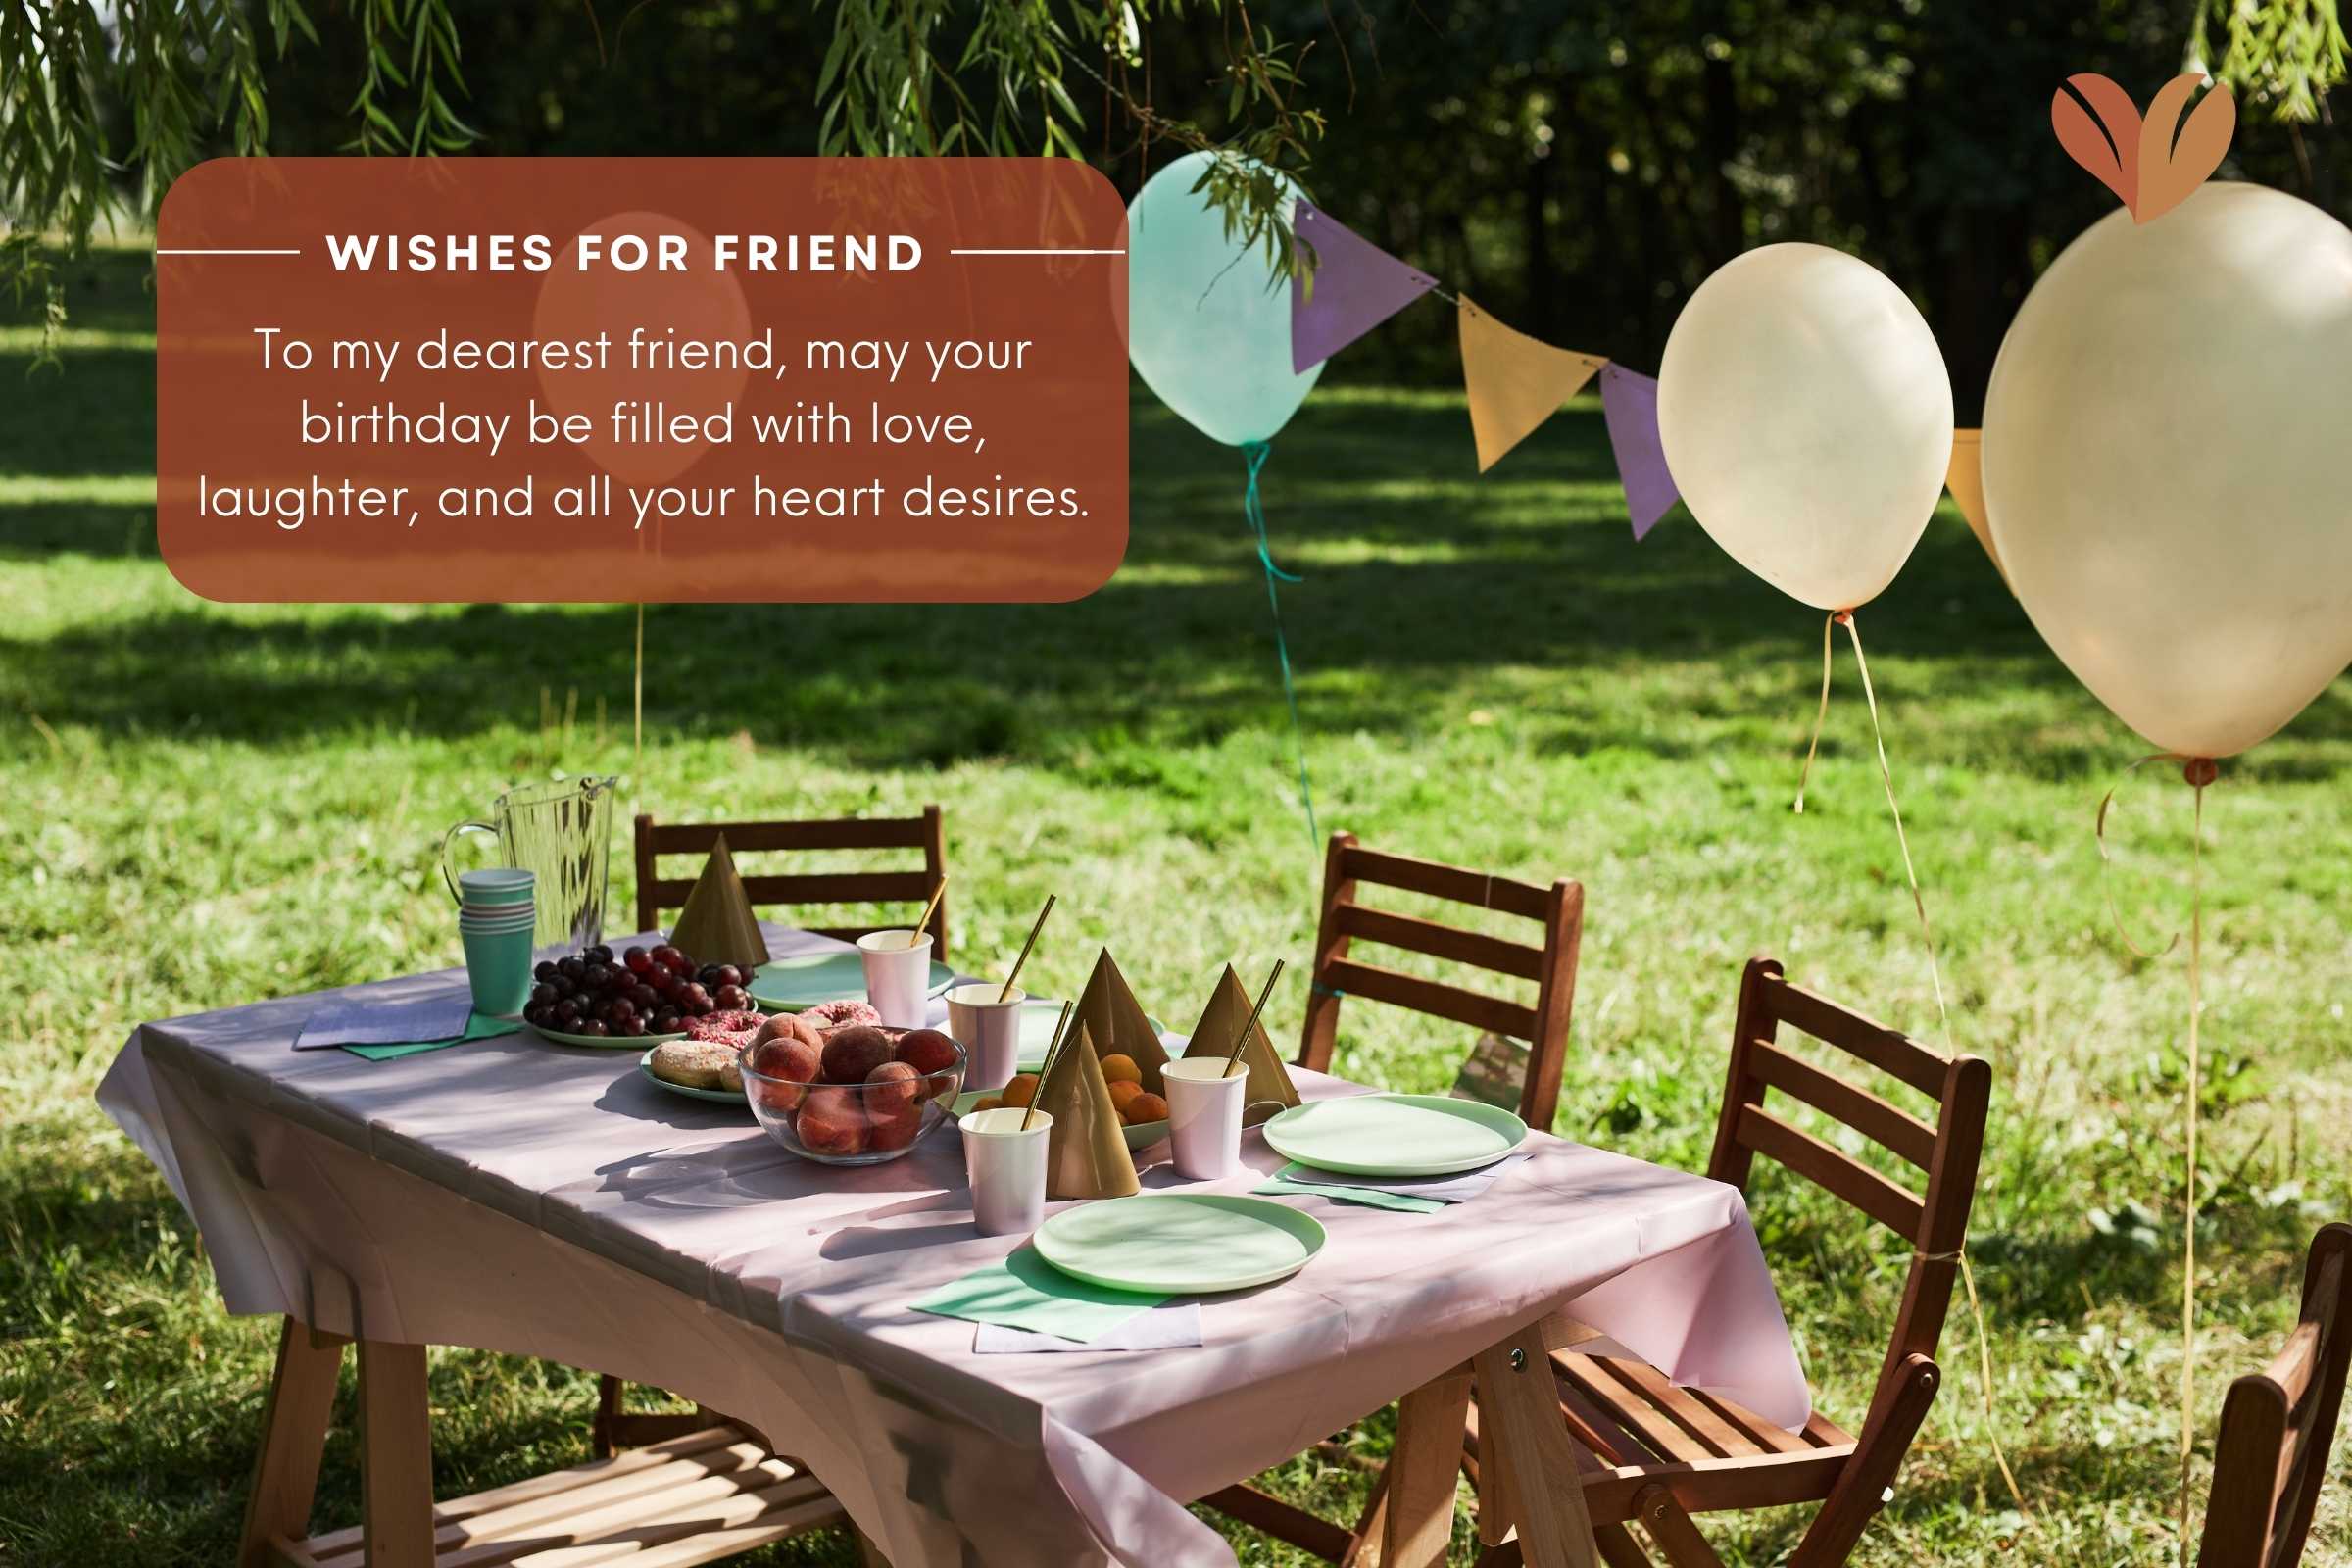 Friendship blooms with heartfelt 'birthday wishes for friend,' surrounded by joy and laughter.